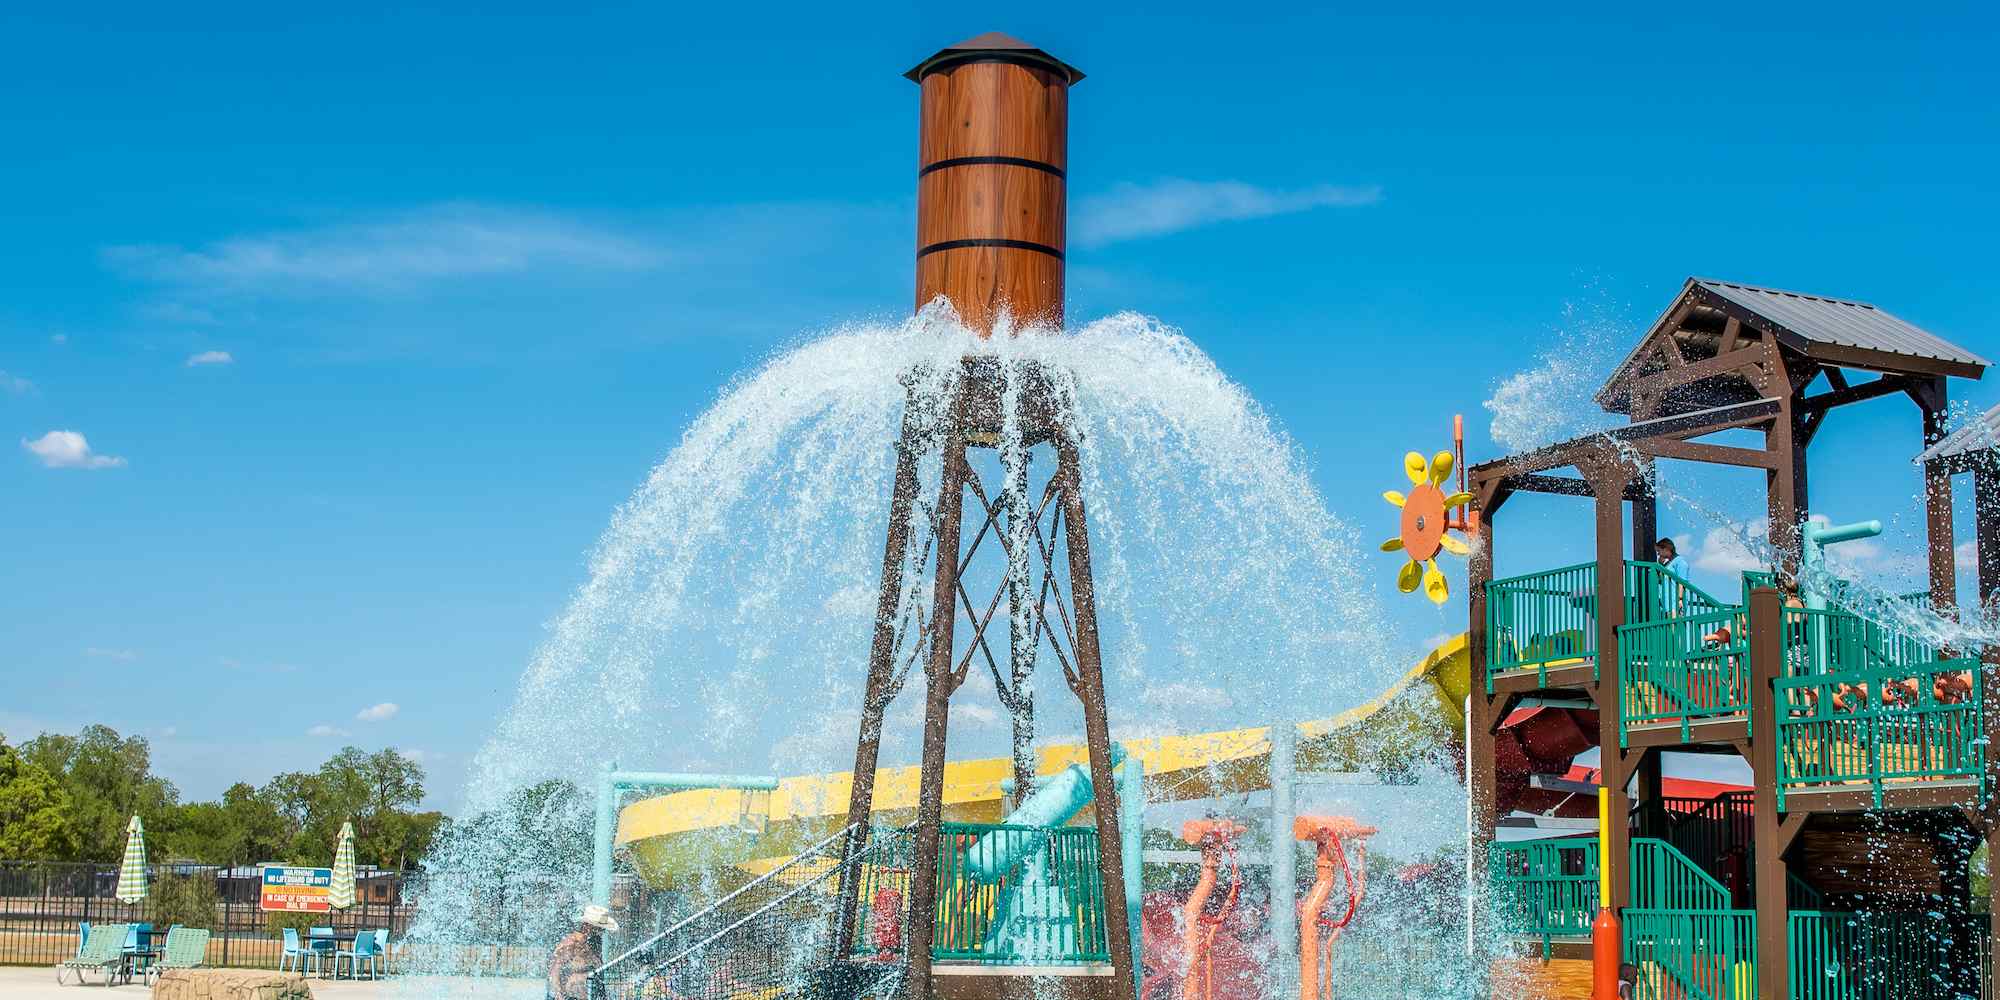 The water playground at Camp Fimfo Waco